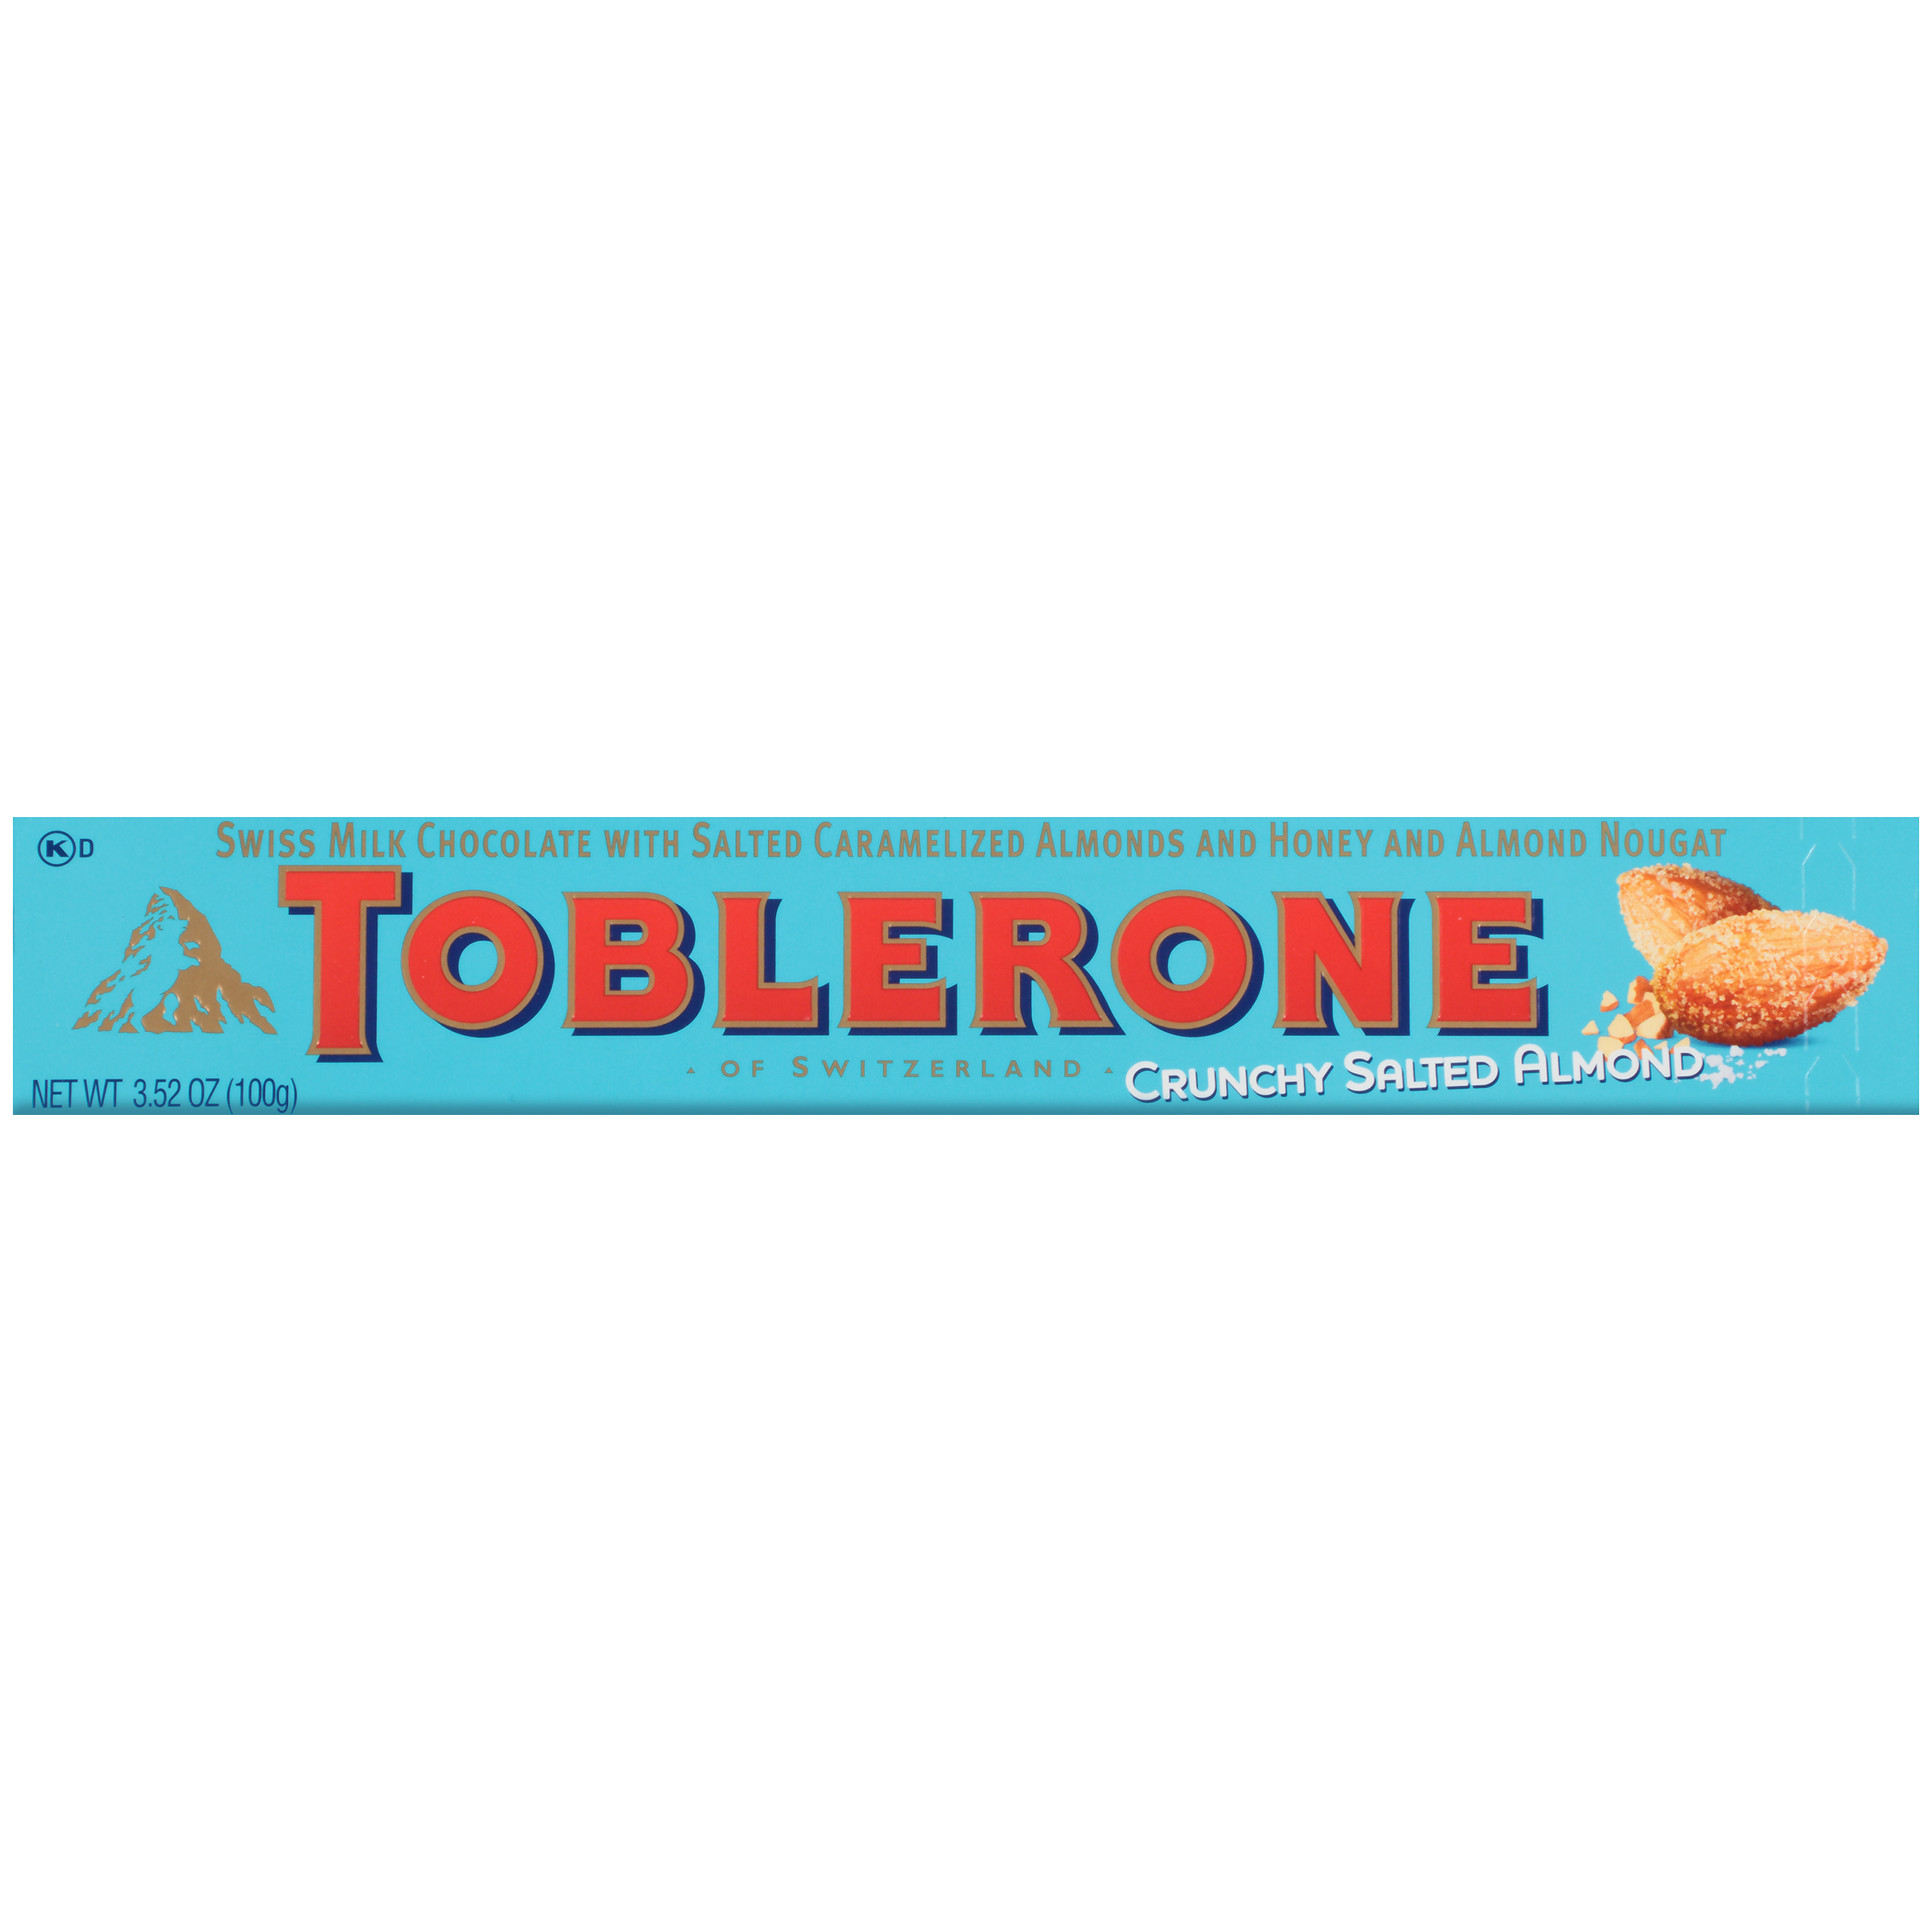 Toblerone Swiss Milk Chocolate Candy Bars with Salted Caramelized Almonds and Honey and Almond Nougat, 3.52 oz Bar